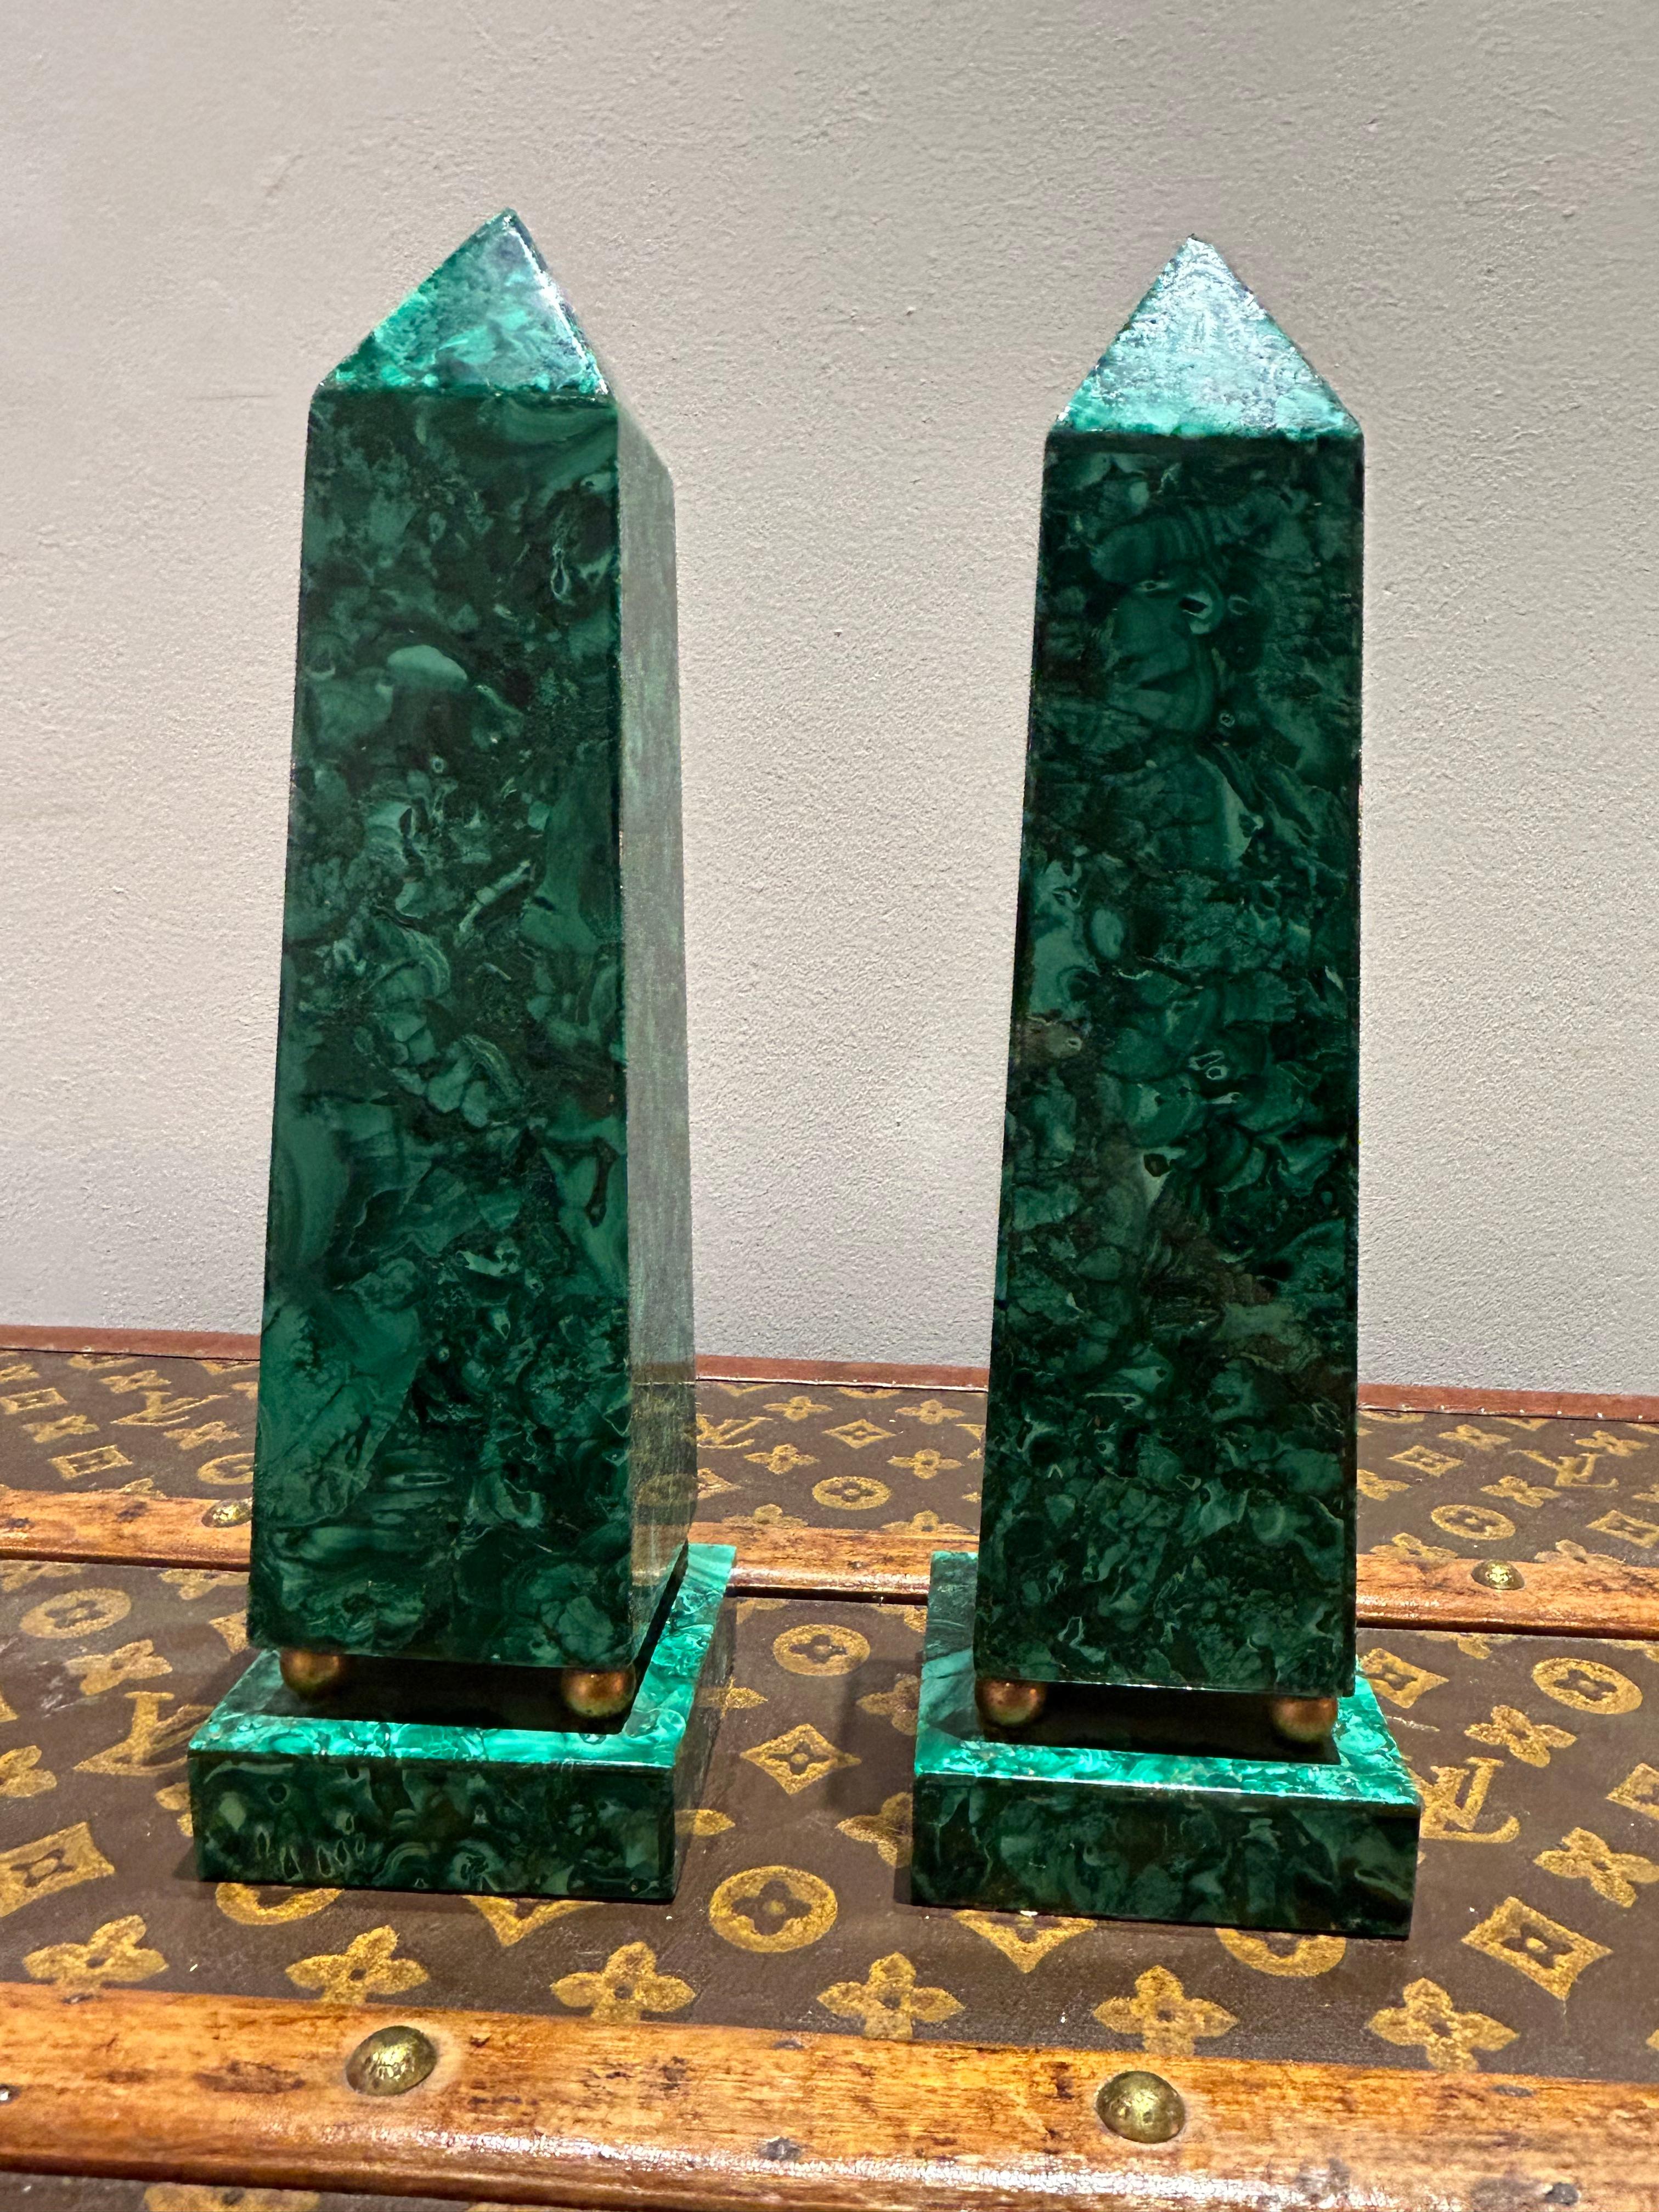 Beautiful late 19th Century Pair of Malachite Obelisks.
Each obelisk seat on 4 bronze balls as legs and a malachite base.

Dimensions of each obelisk: Height 28cm, width 8cm, depth 8cm 


Condition: Please view the very detailed pictures as they